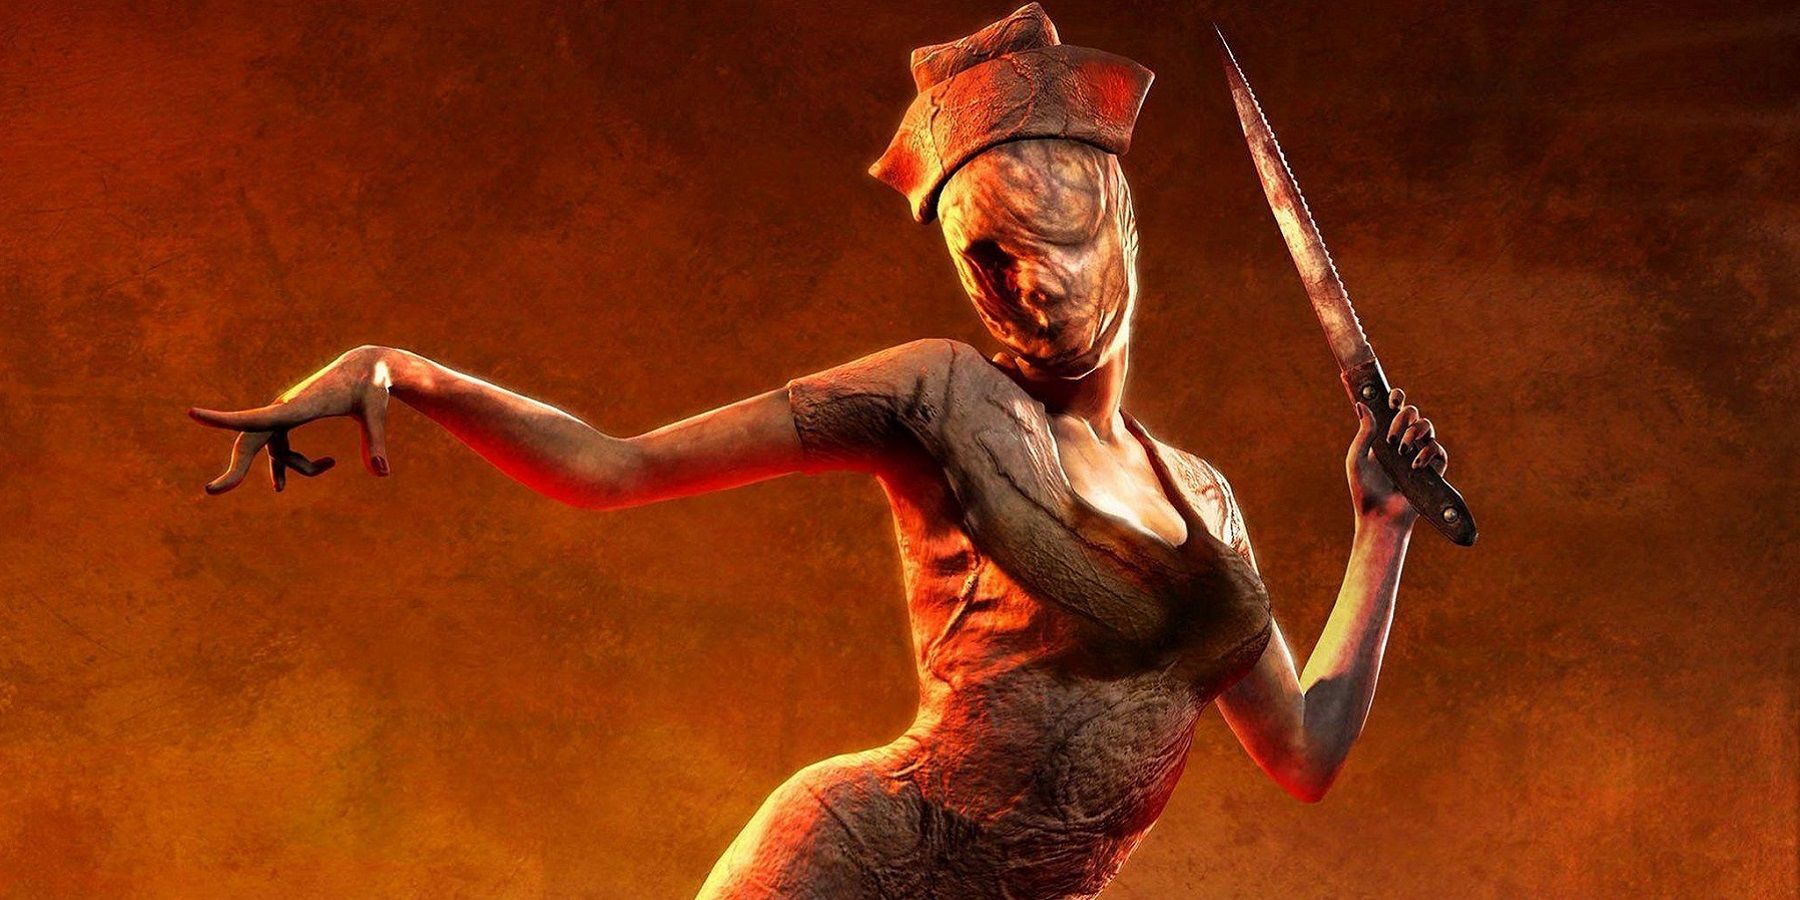 Image showing a nurse from Silent Hill on a dark orange background.